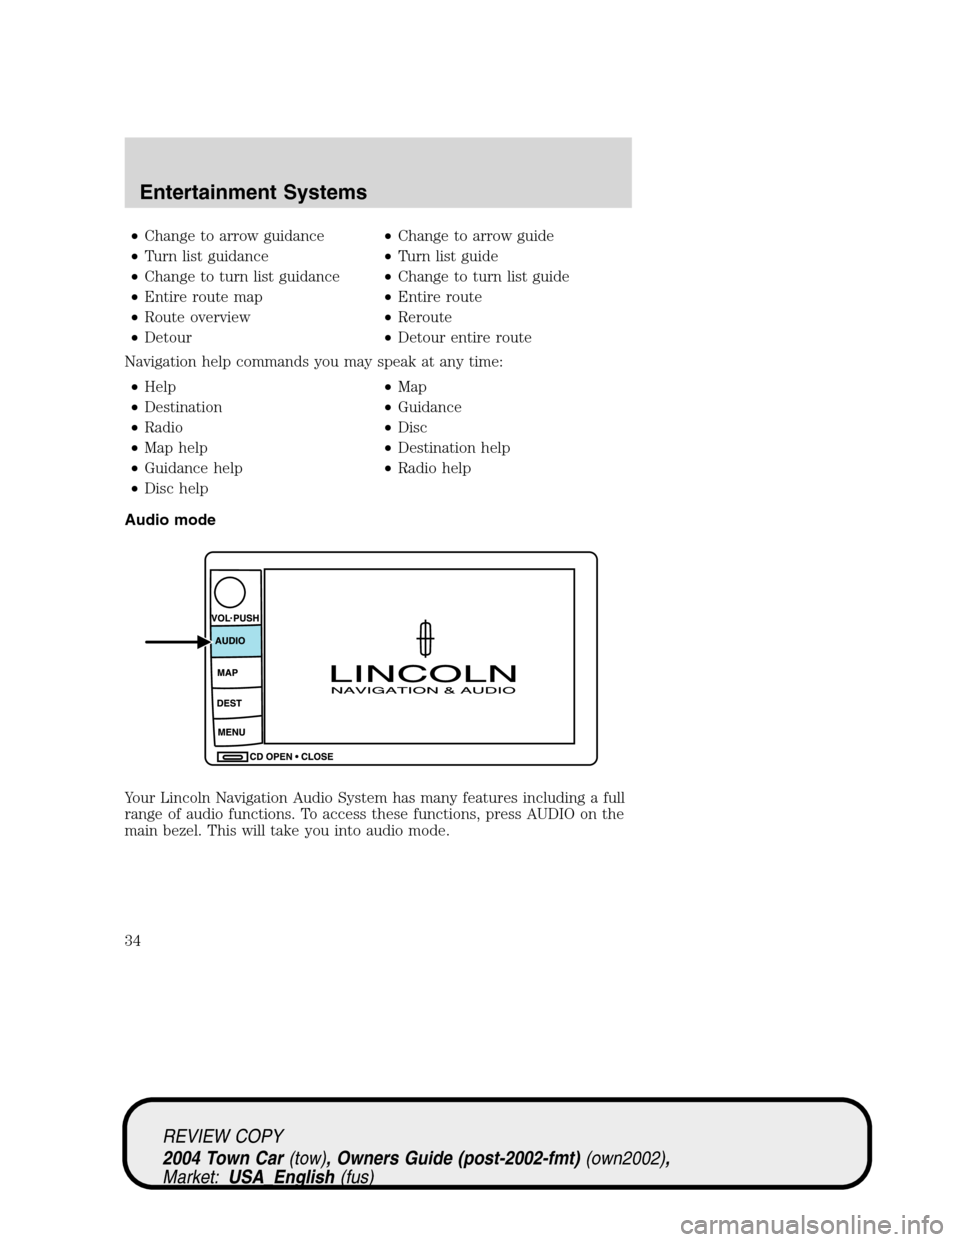 LINCOLN TOWN CAR 2004  Owners Manual •Change to arrow guidance•Change to arrow guide
•Turn list guidance•Turn list guide
•Change to turn list guidance•Change to turn list guide
•Entire route map•Entire route
•Route over